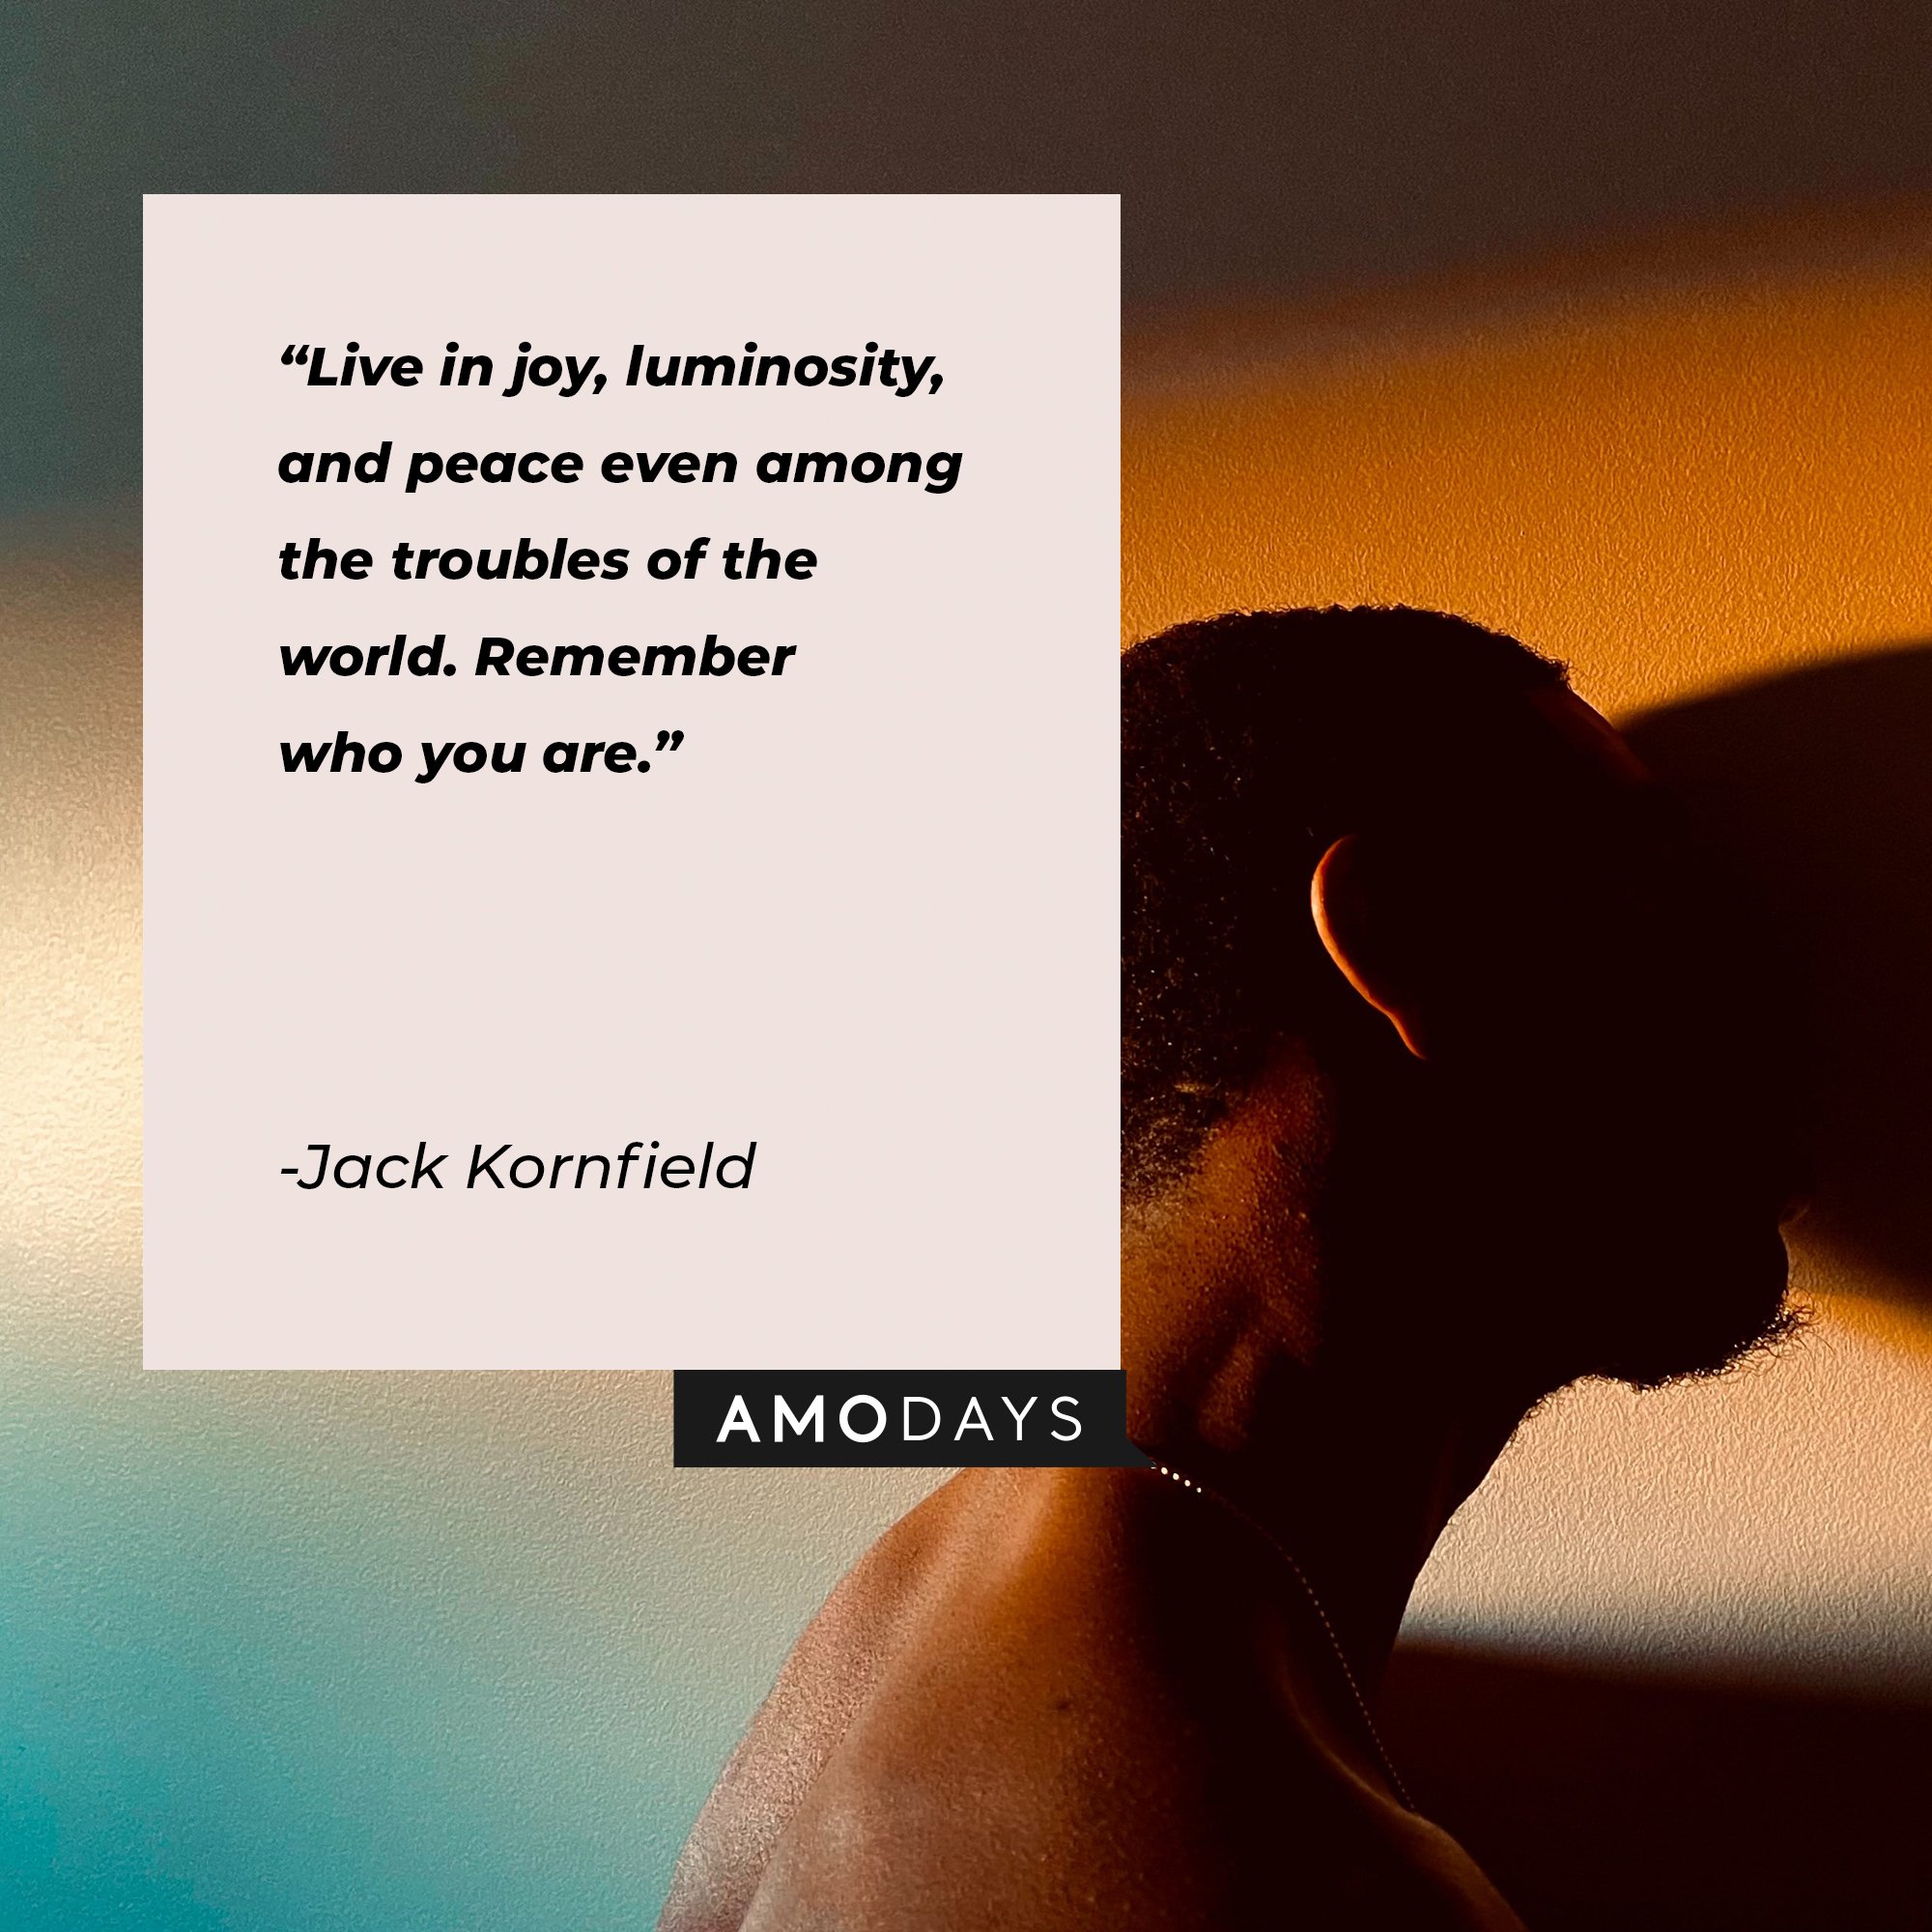 Jack Kornfield’s quote: "Live in joy, luminosity, and peace even among the troubles of the world. Remember who you are." | Image: AmoDays